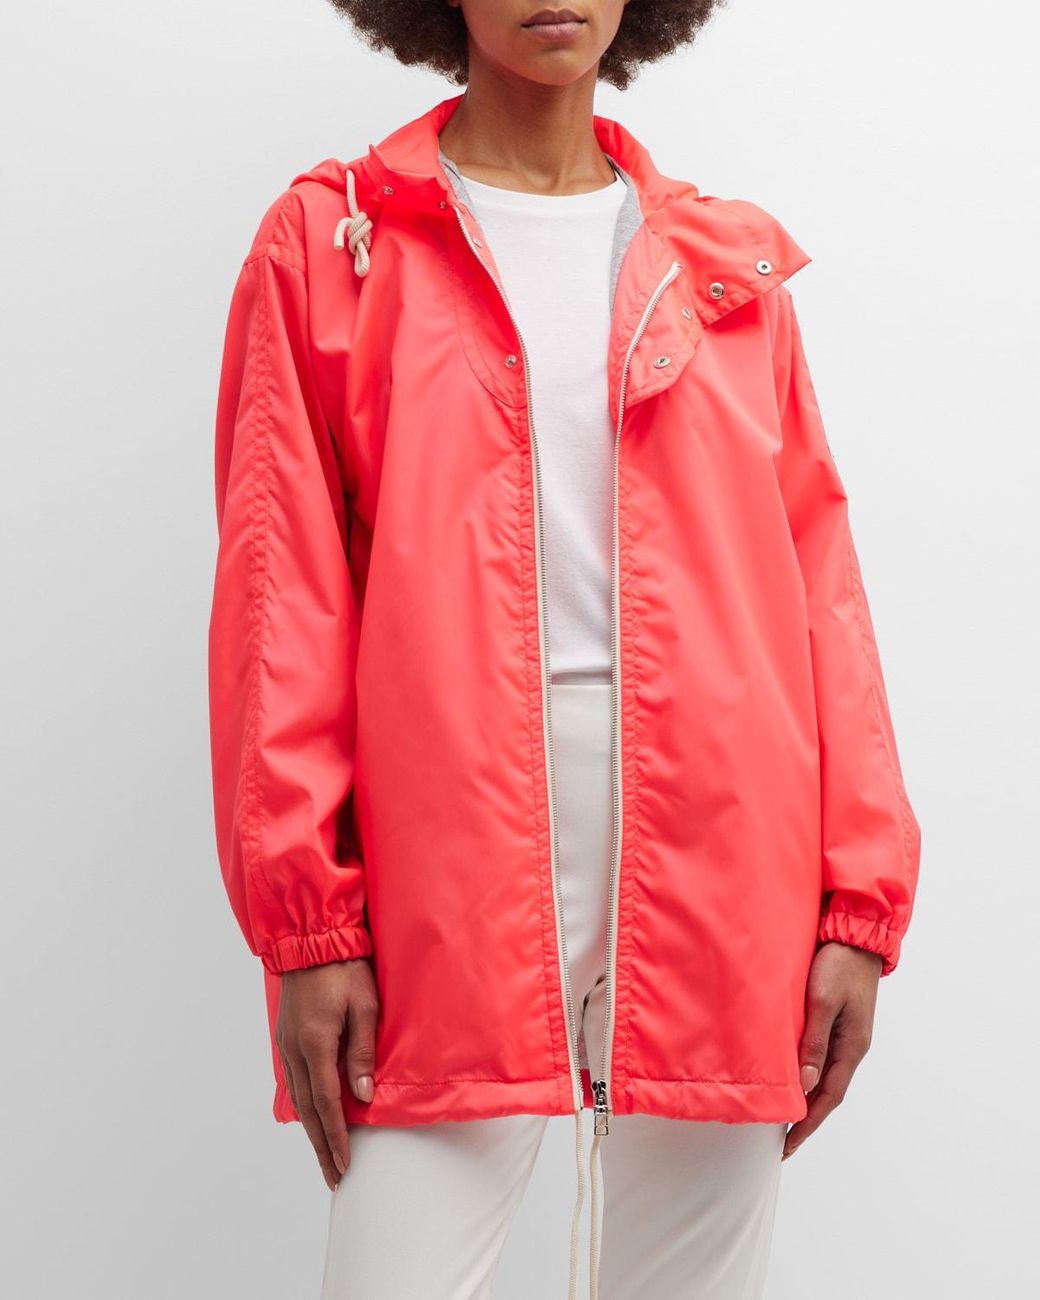 Moncler Genius X Alicia Keys Soho Jacket With Logo Detail in Red | Lyst